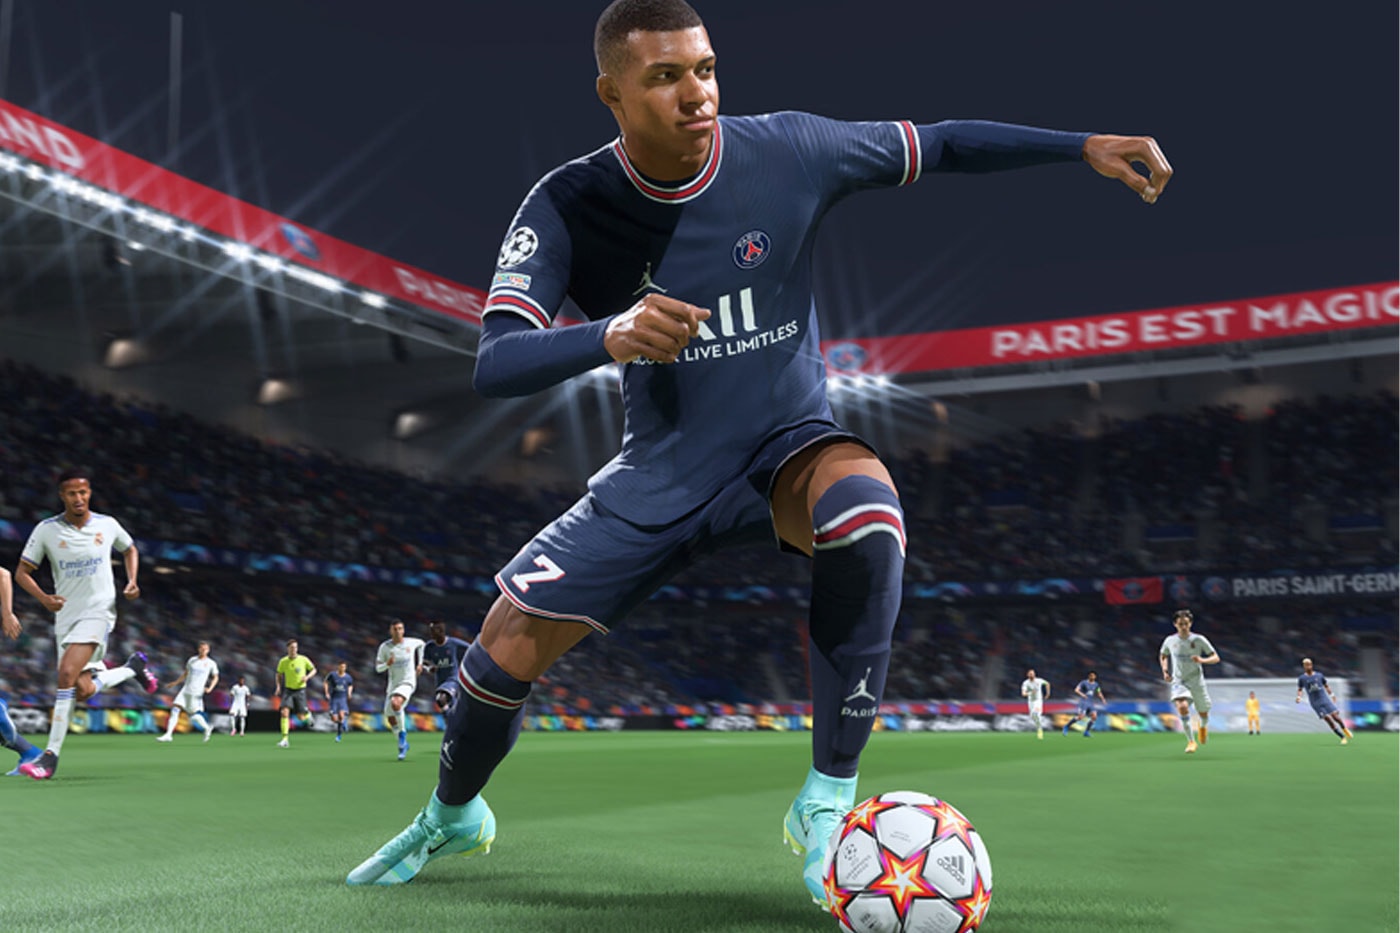 Which Fifa 23 Is Crossplay?